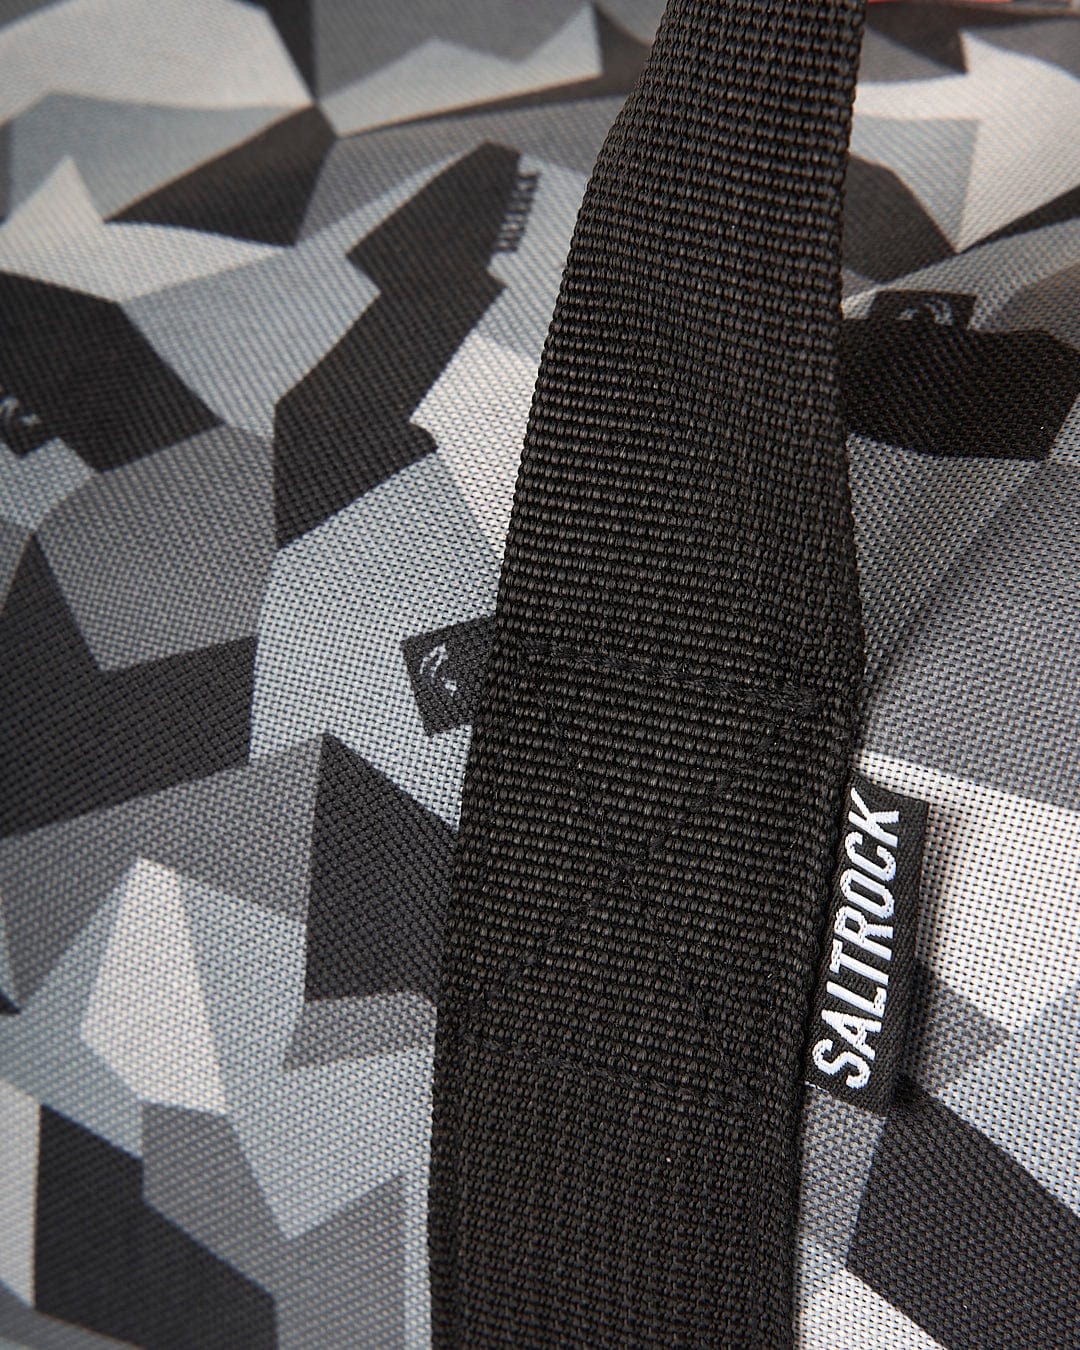 A Saltrock Camo Balboa - Hold-All Bag - Dark Grey with a grey and black camouflage pattern.